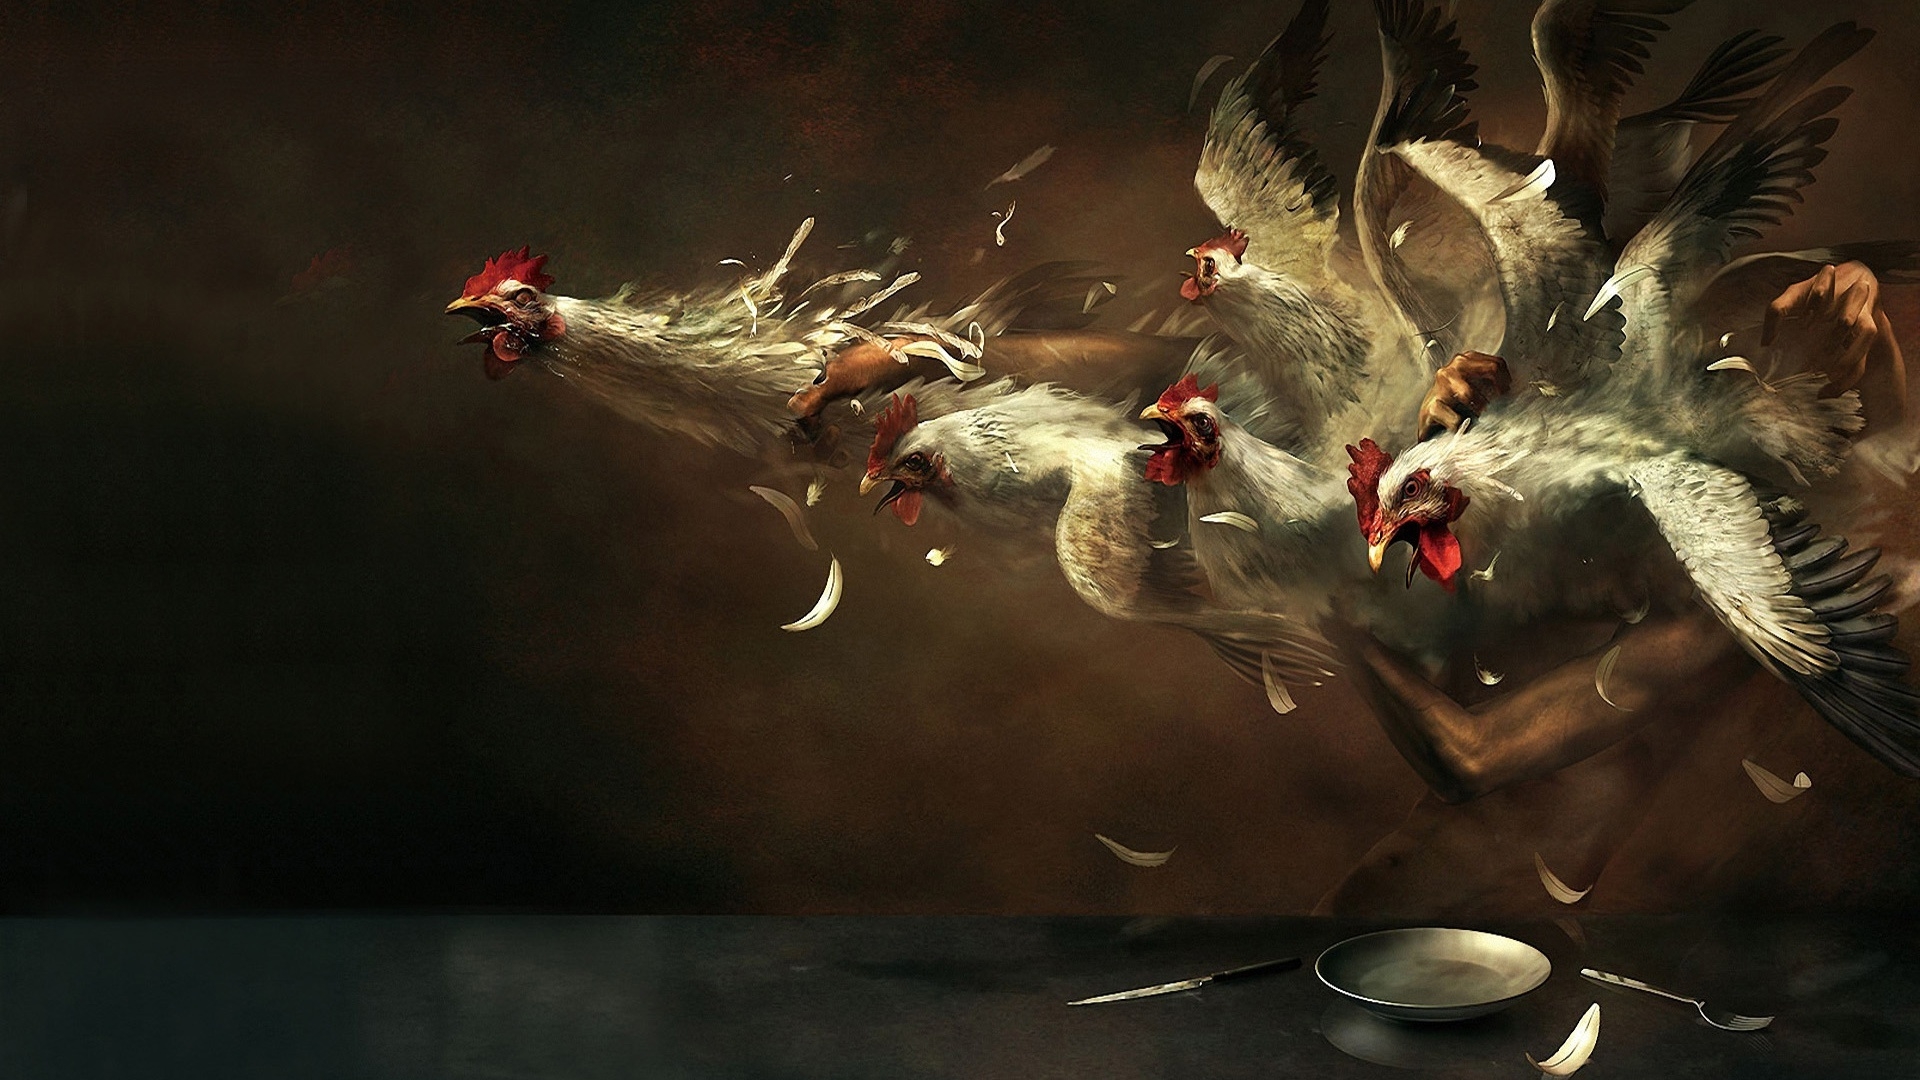 Crazy Chickens for 1920 x 1080 HDTV 1080p resolution